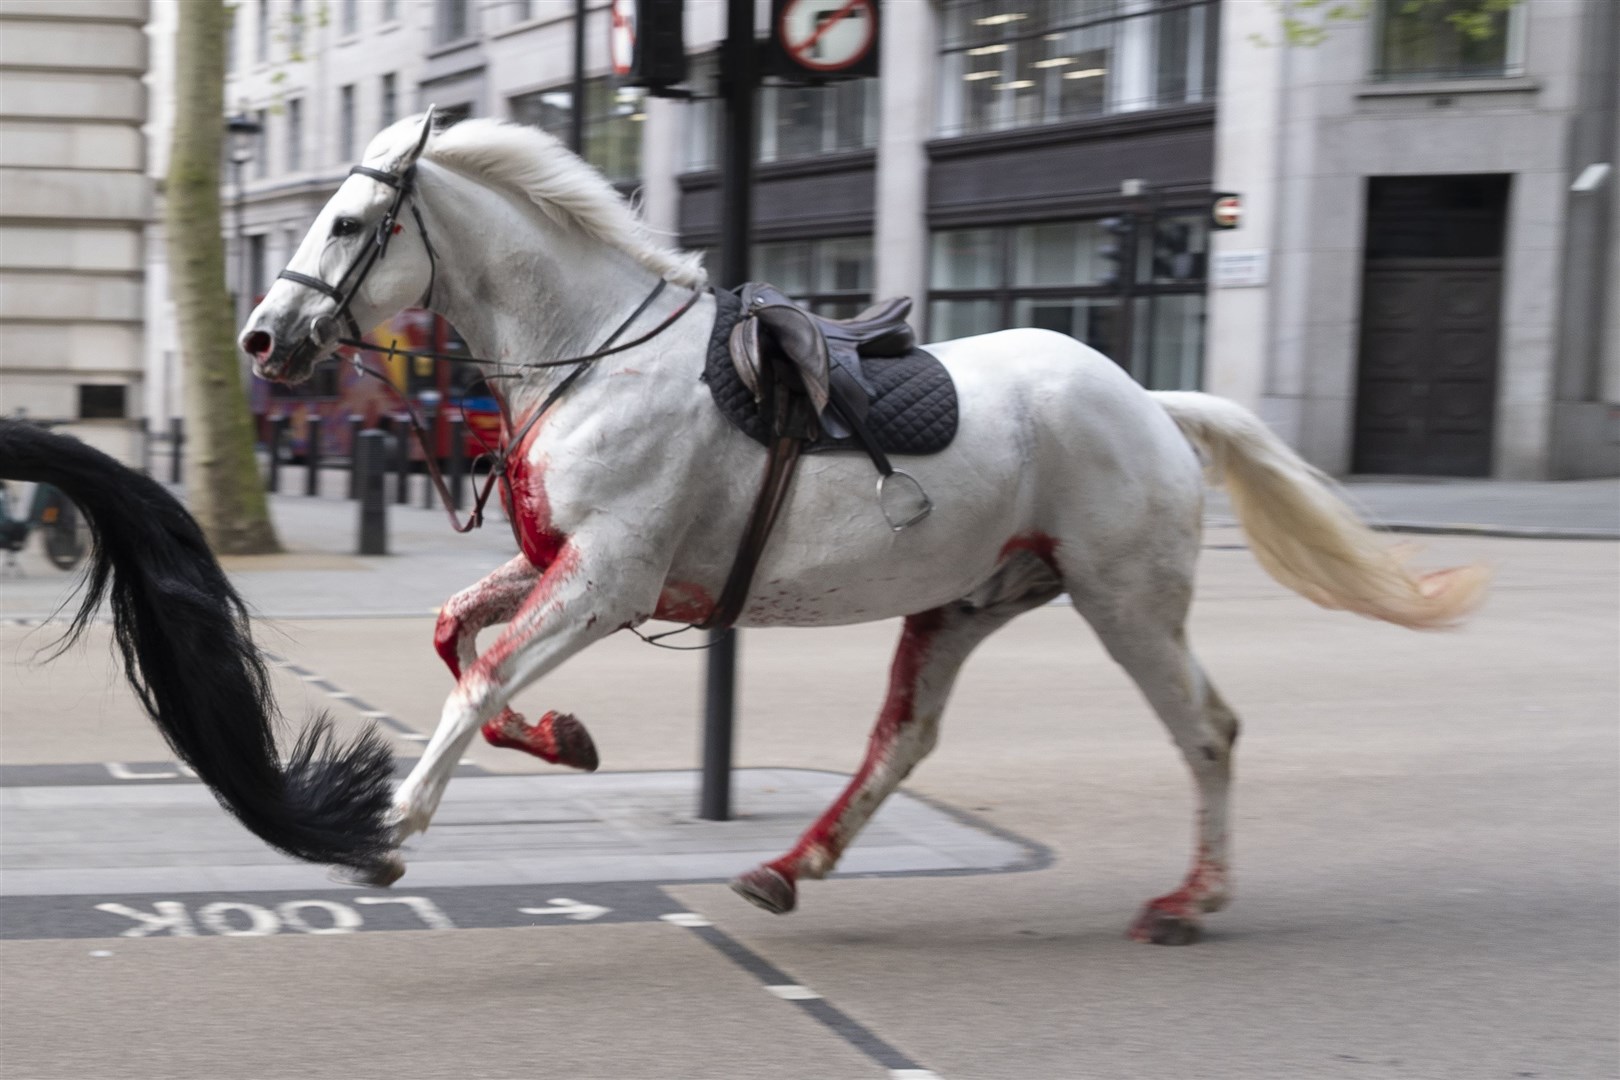 Two of the animals, a black horse and a grey drenched in blood, were seen galloping through central London (Jordan Pettitt/PA)